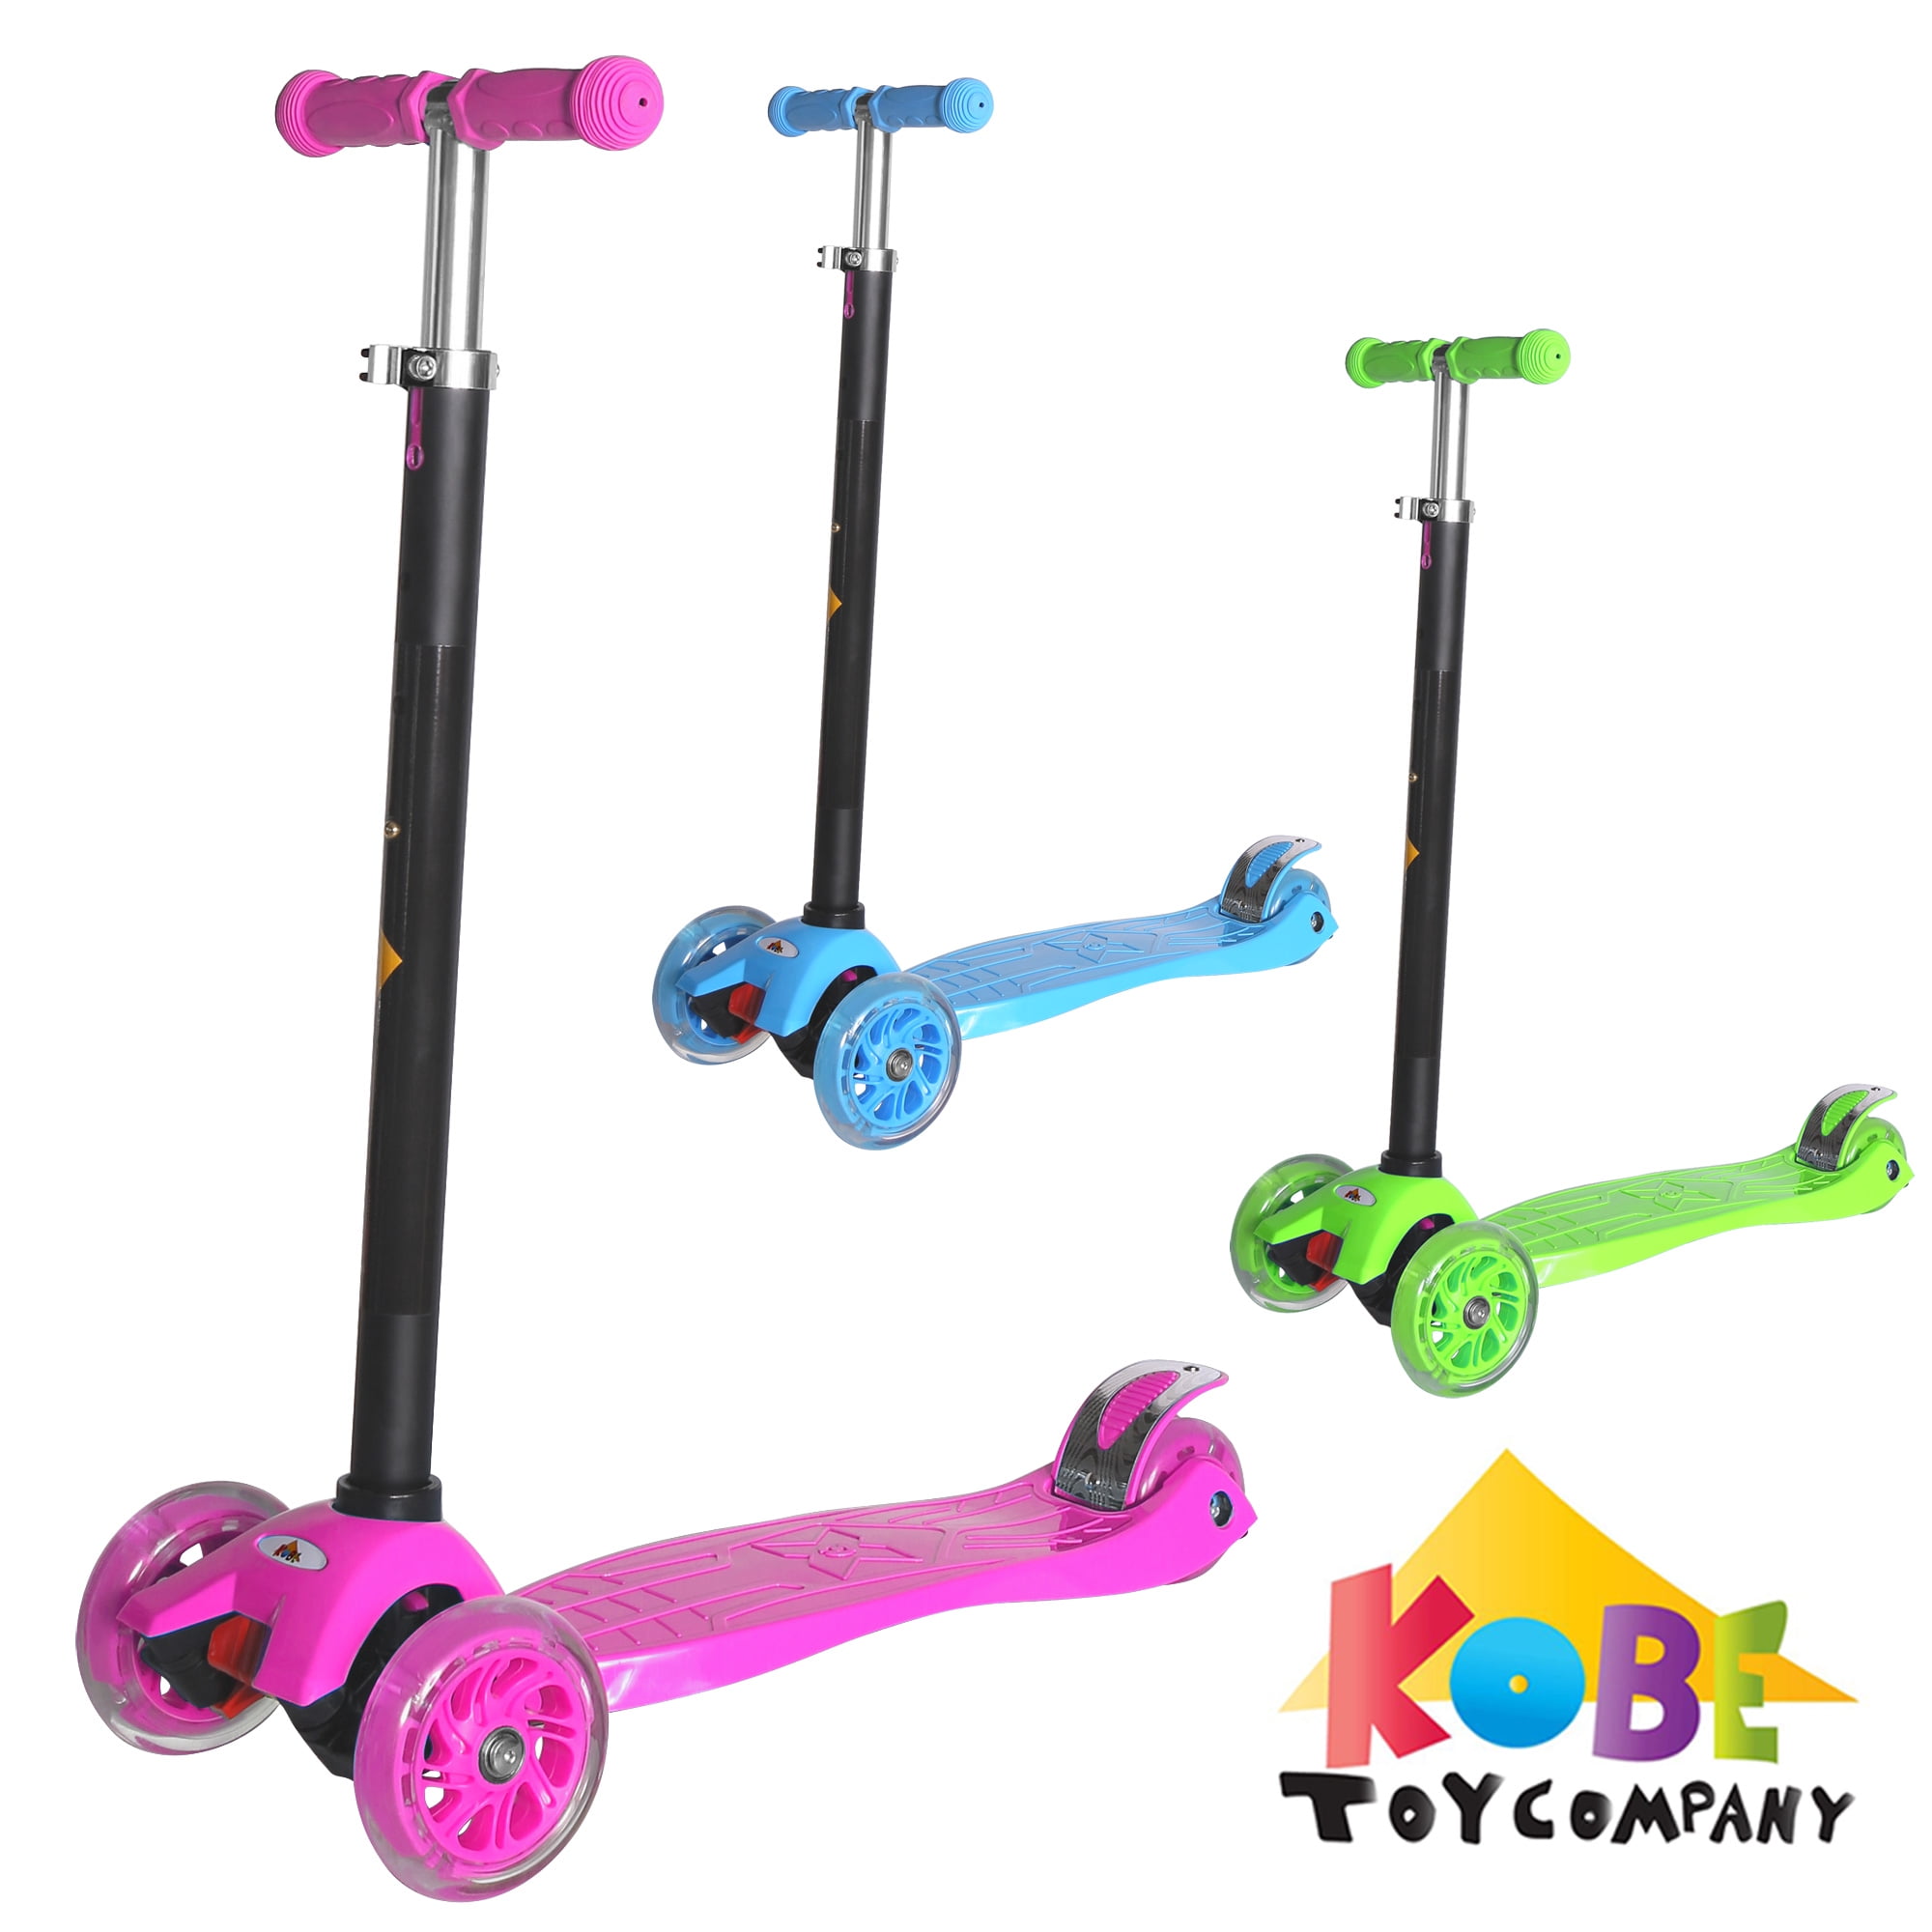 4 wheel scooter for kids